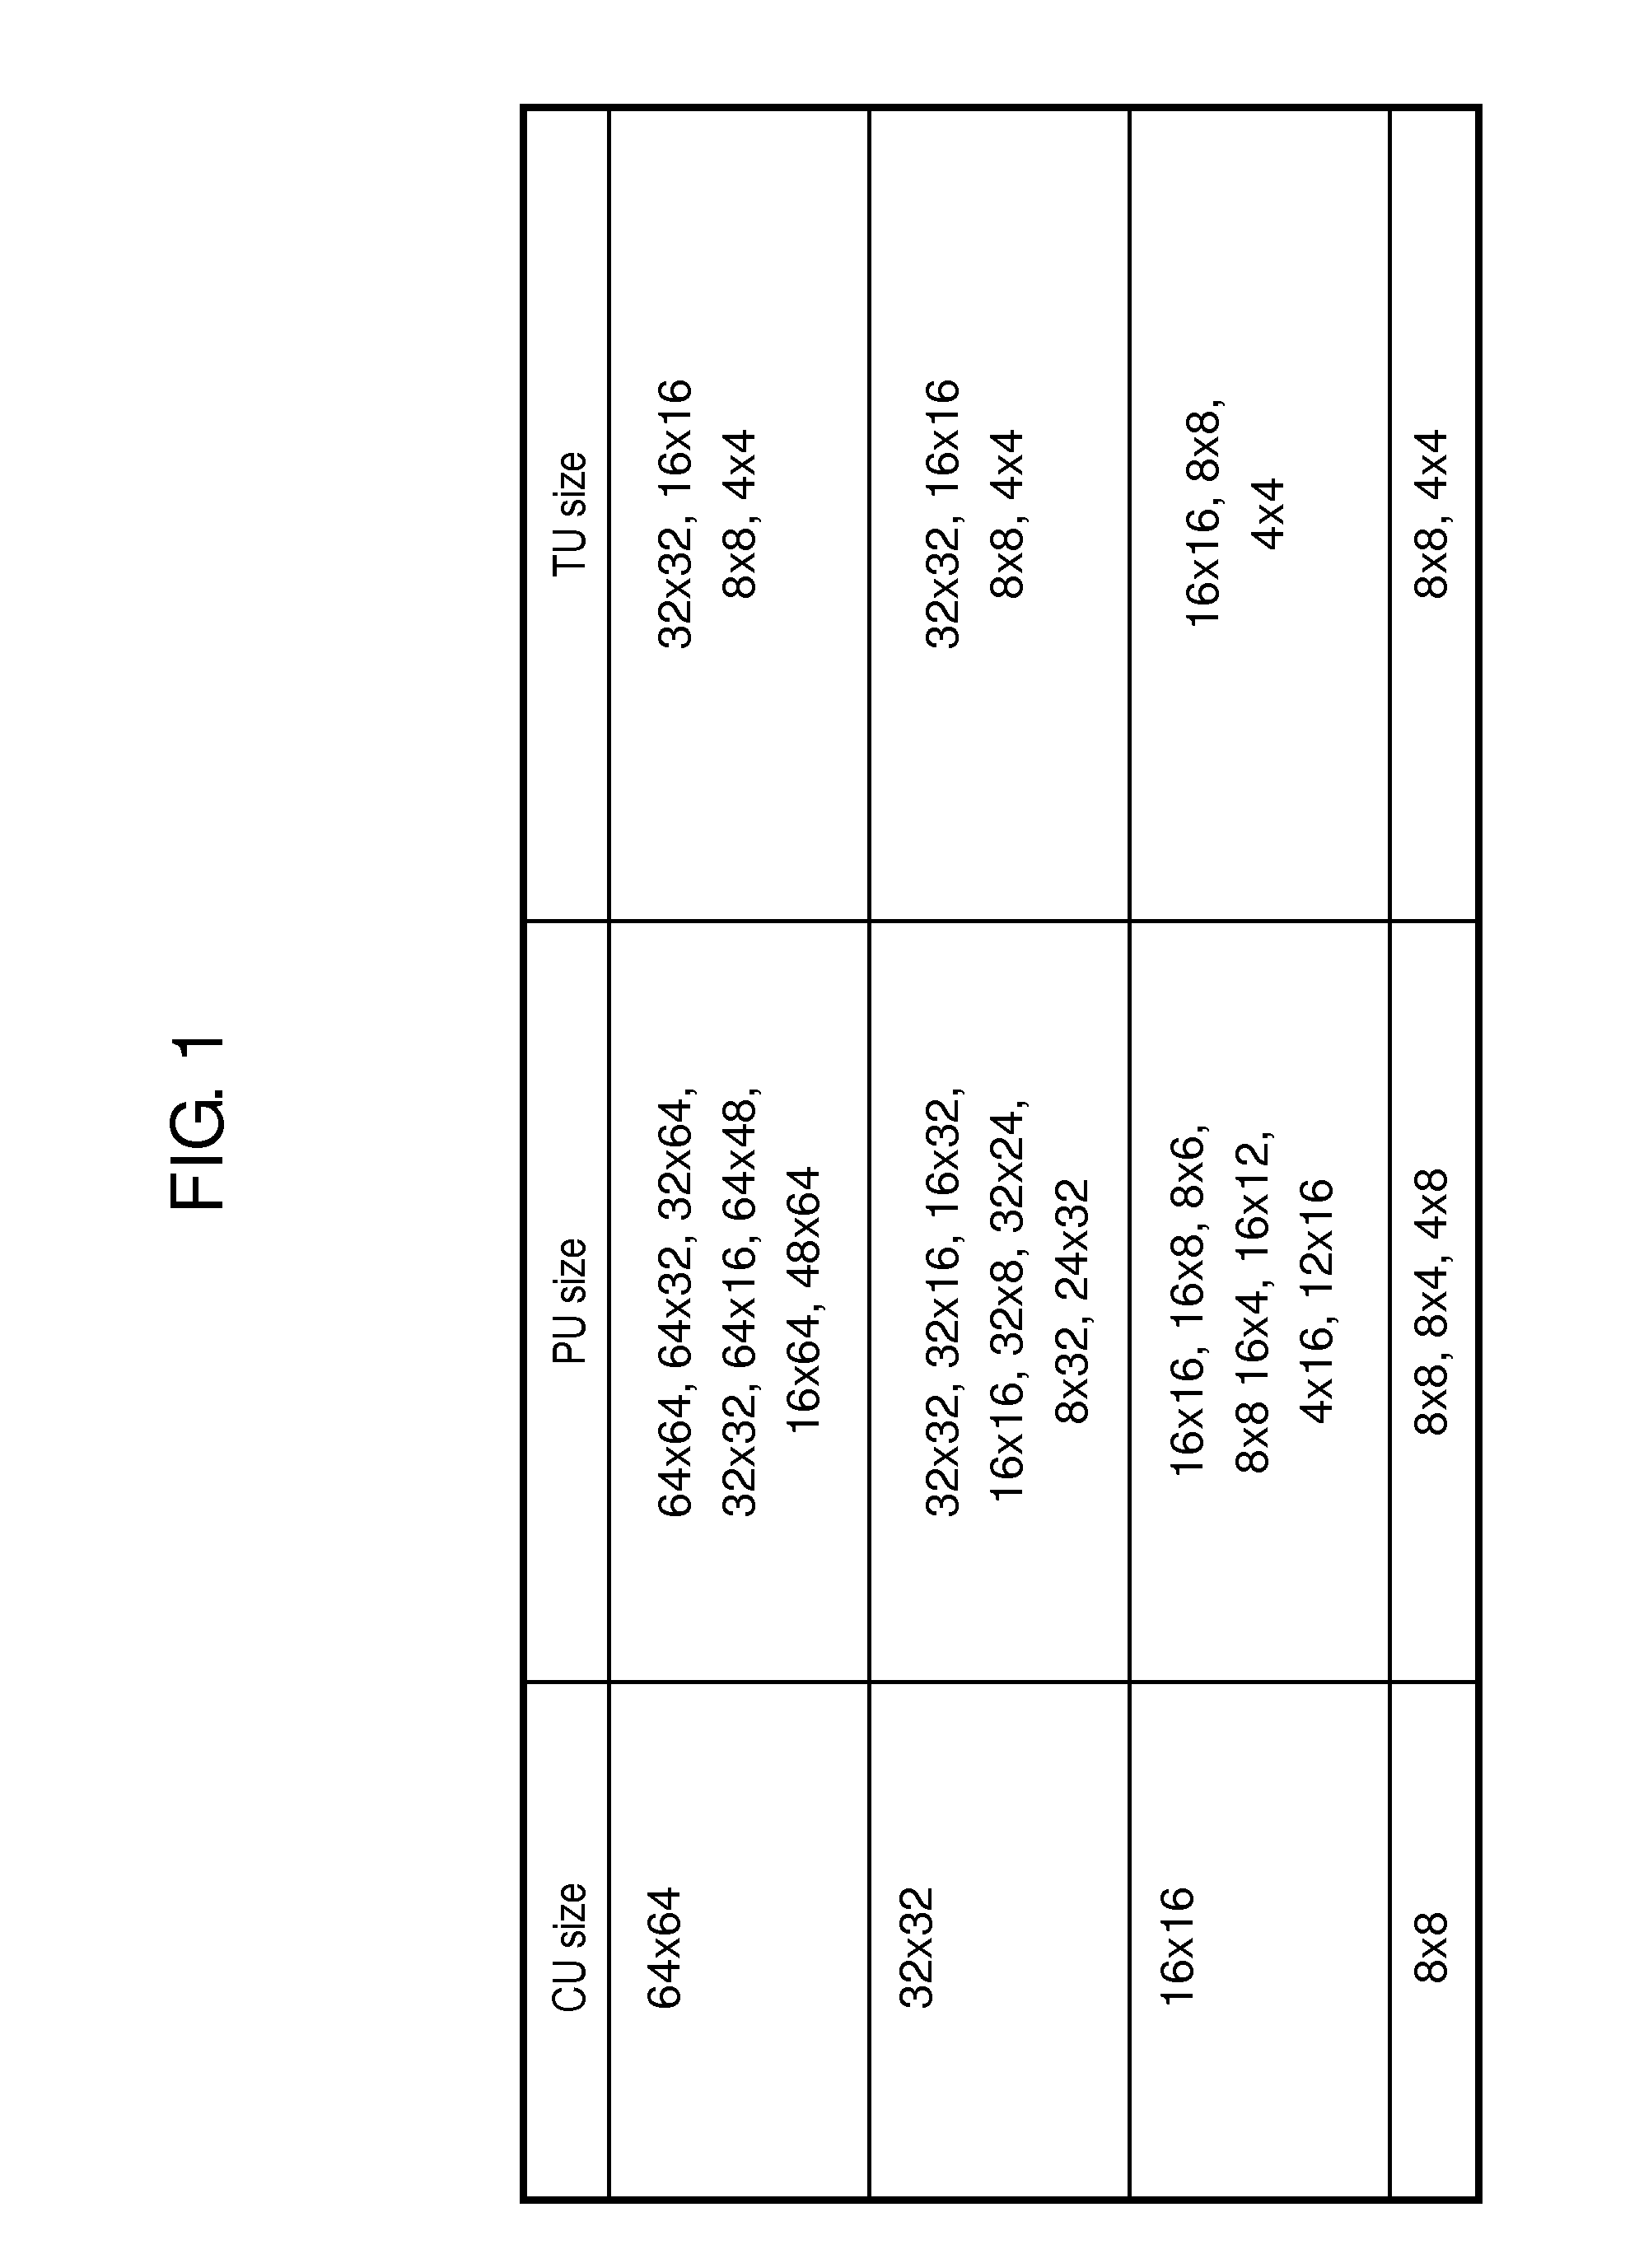 Video coding apparatus and video coding method